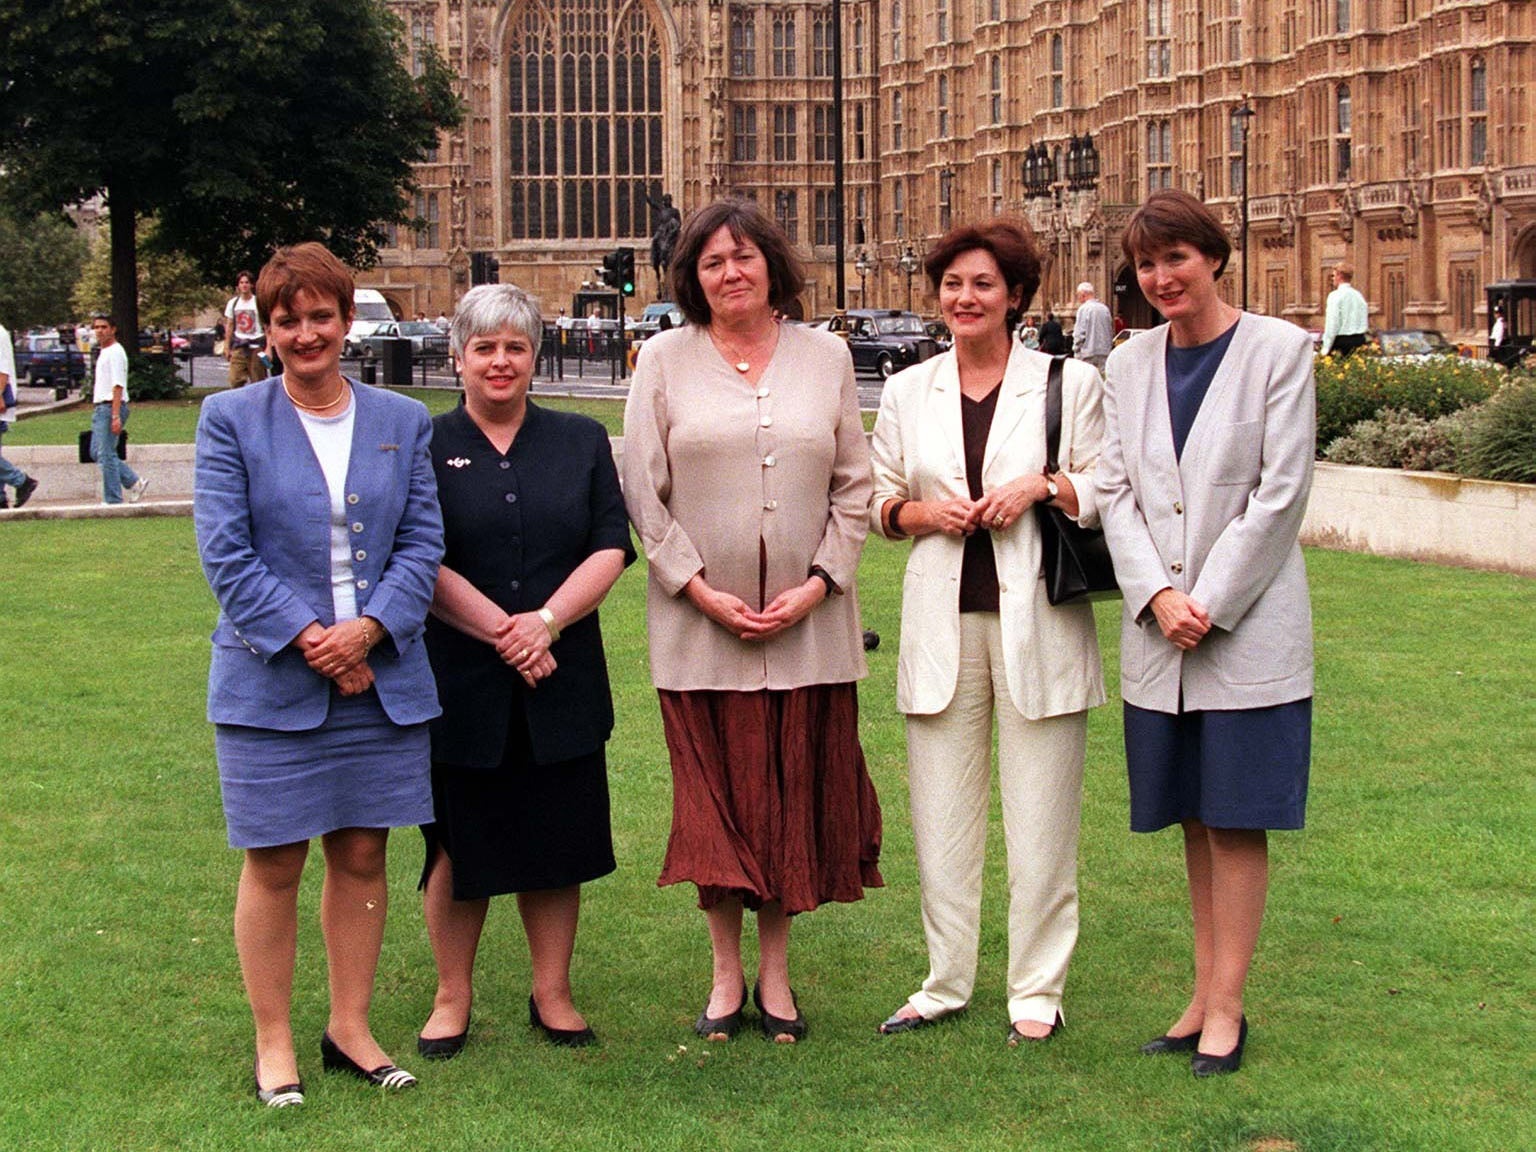 Joan Ruddock is second from right next to Harriet Harman, along with other Labour MPs Tessa Jowell, Barbara Roche and Clare Short in 1997